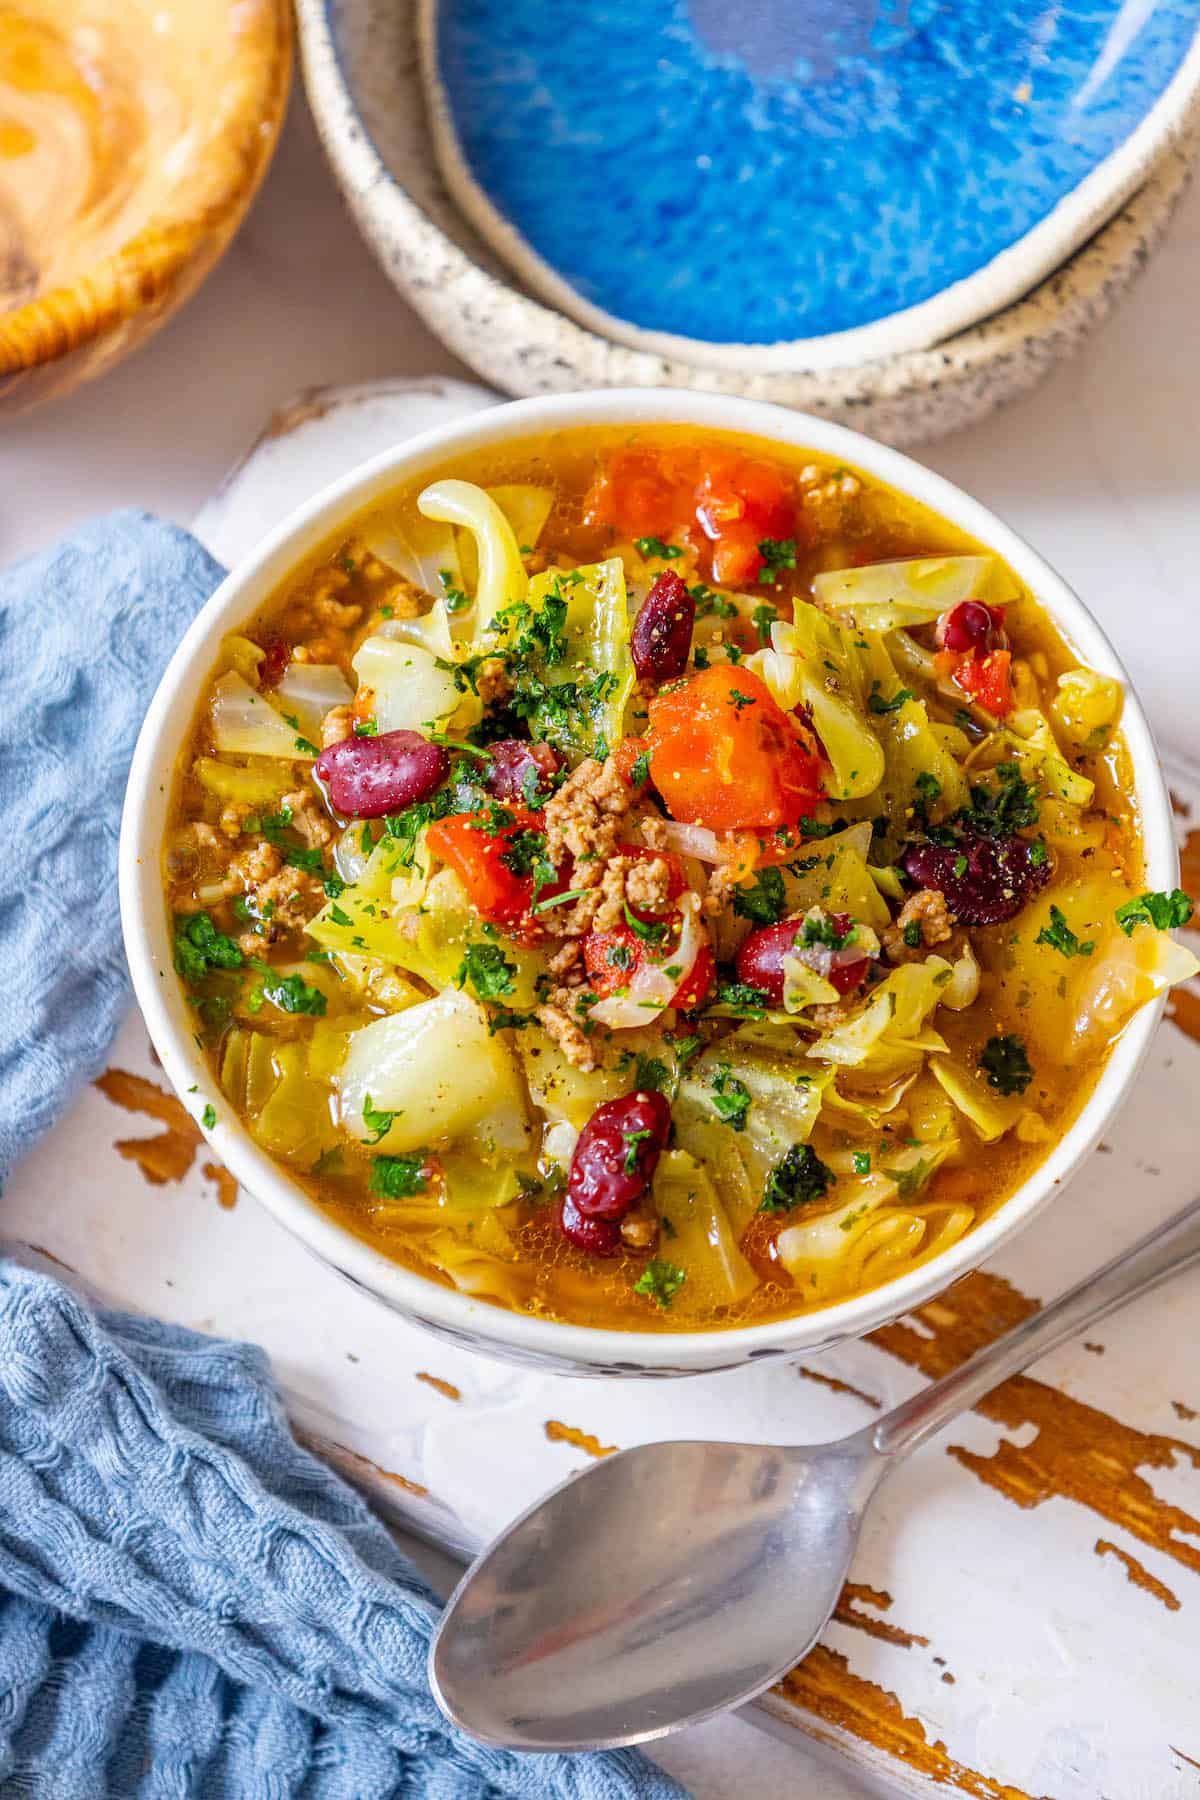 A bowl of soup with cabbage and meat.